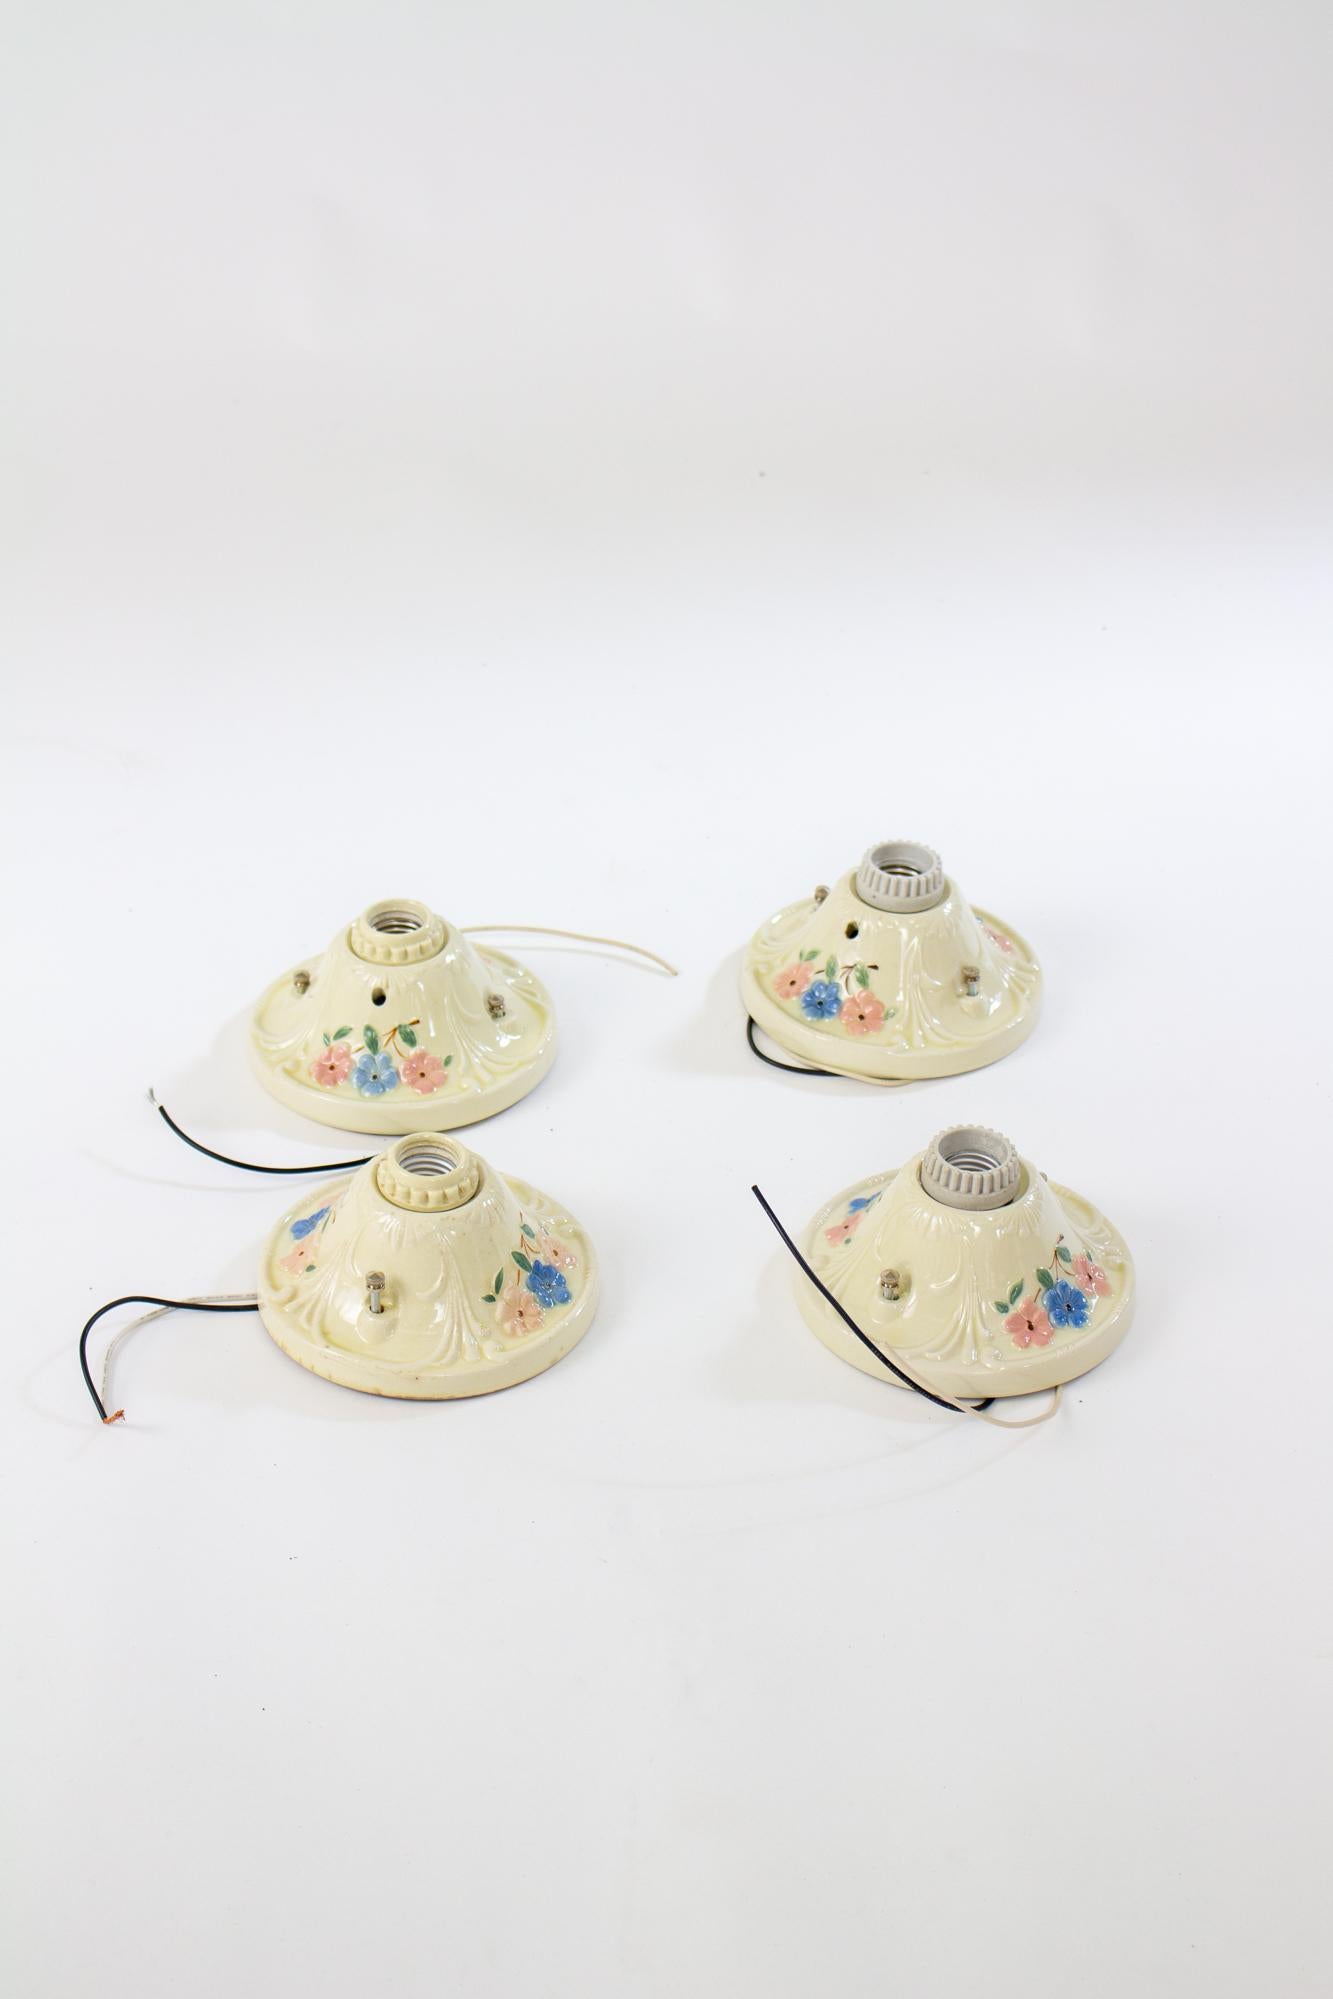 1950’s Porcelain Harmony House flowered flush mount single bulb fixture. Simple porcelain ceiling mount fixture for an exposed bulb. Ivory with blue and pink flowers. In good condition, rewired with new socket. US 120V hardwired. 

Dimensions: